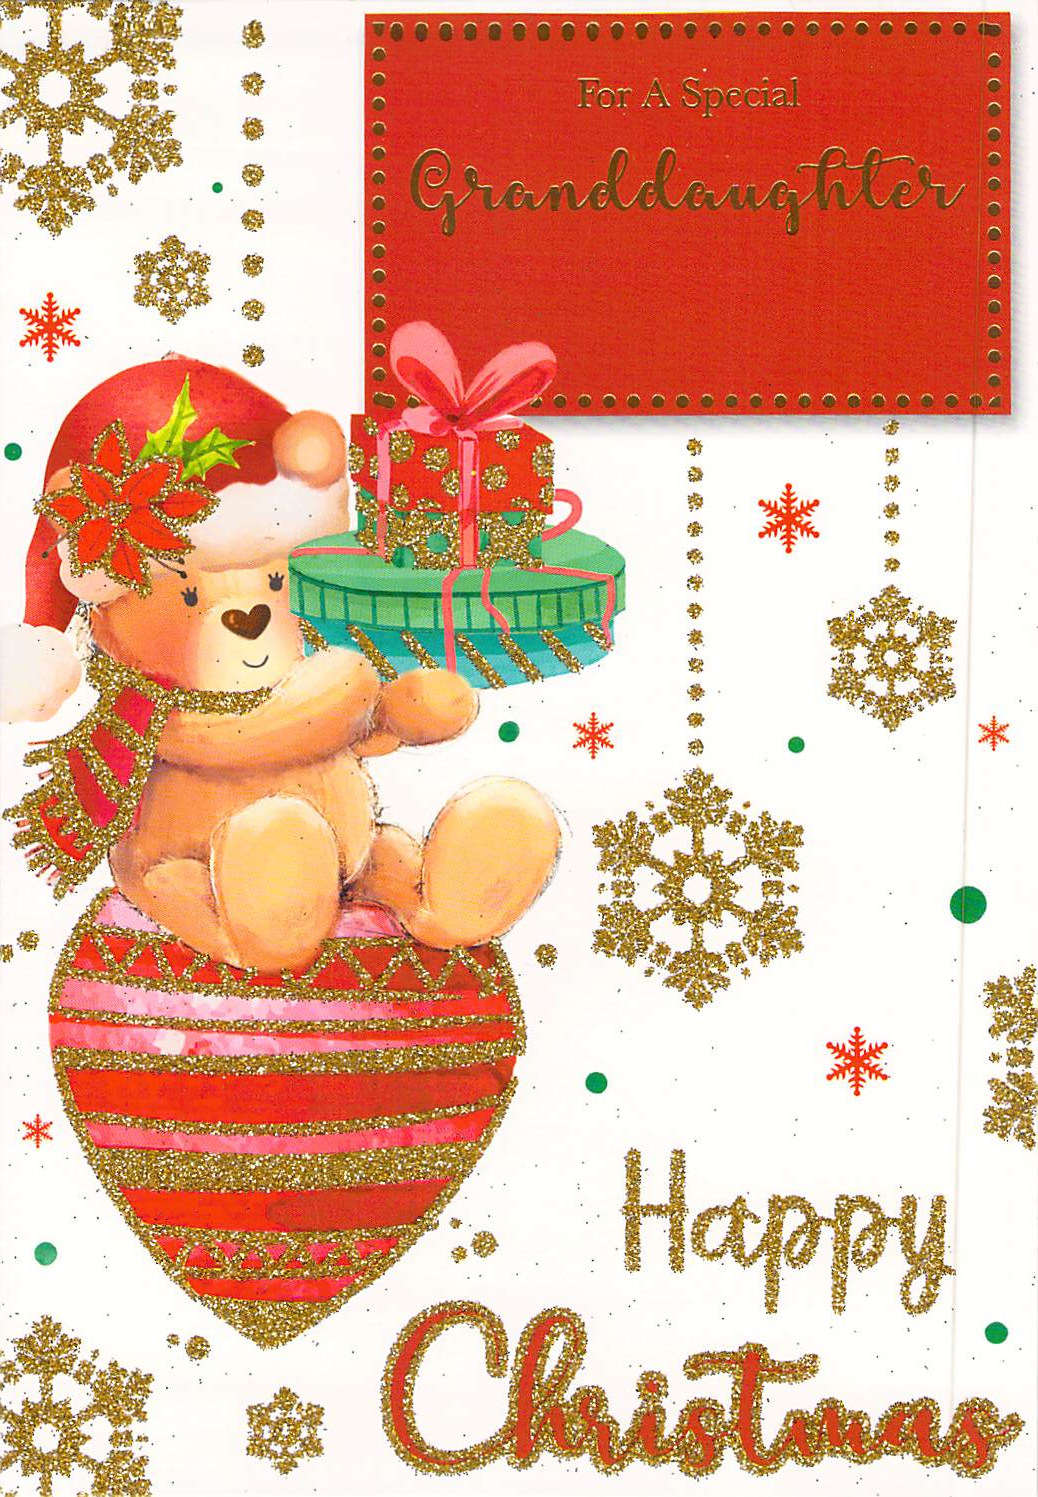 Granddaughter - Christmas - Bauble - Greeting Card